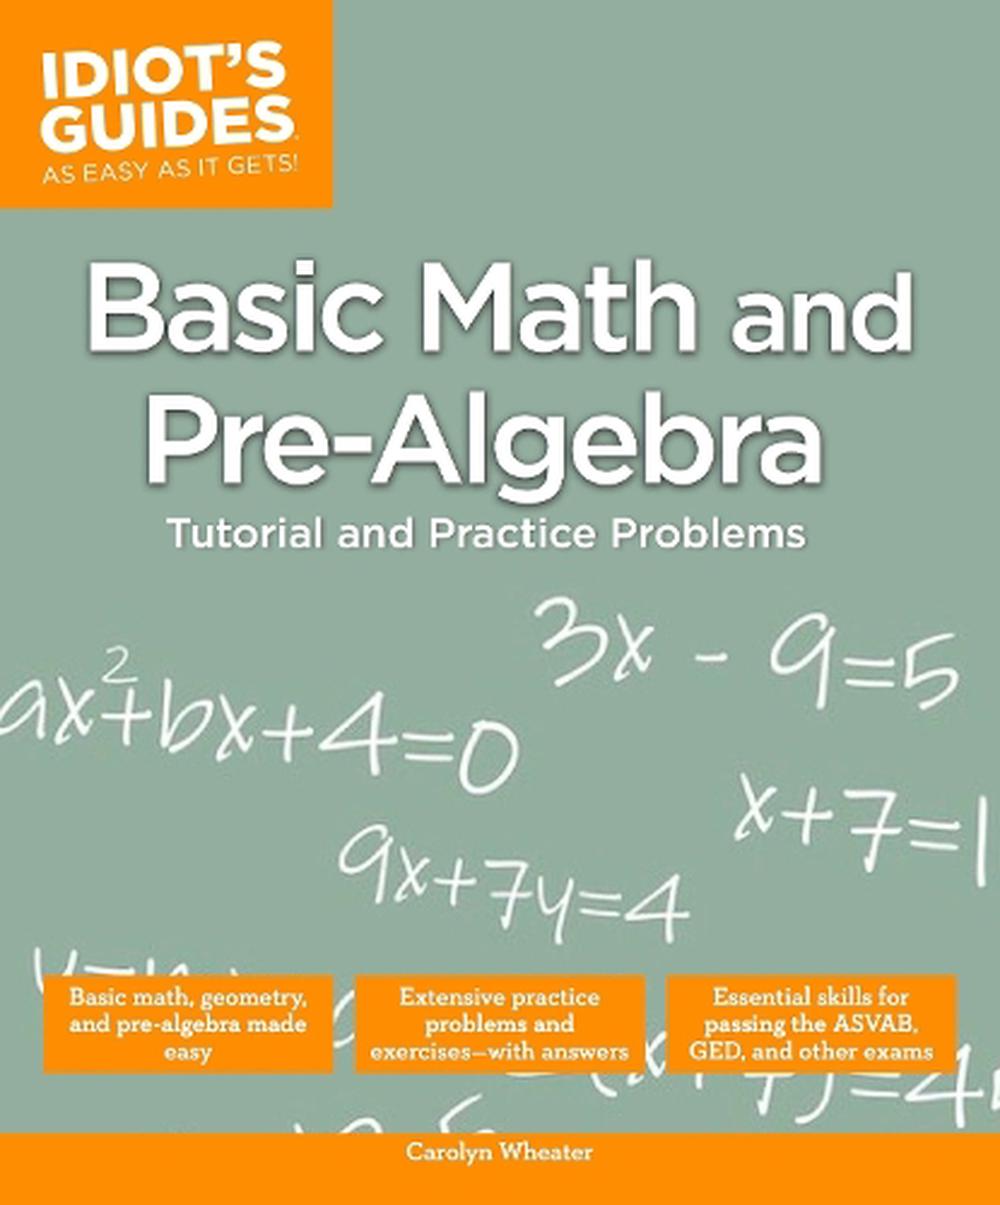 Idiot's Guides: Basic Math and Pre-Algebra by Carolyn Wheater (English ...